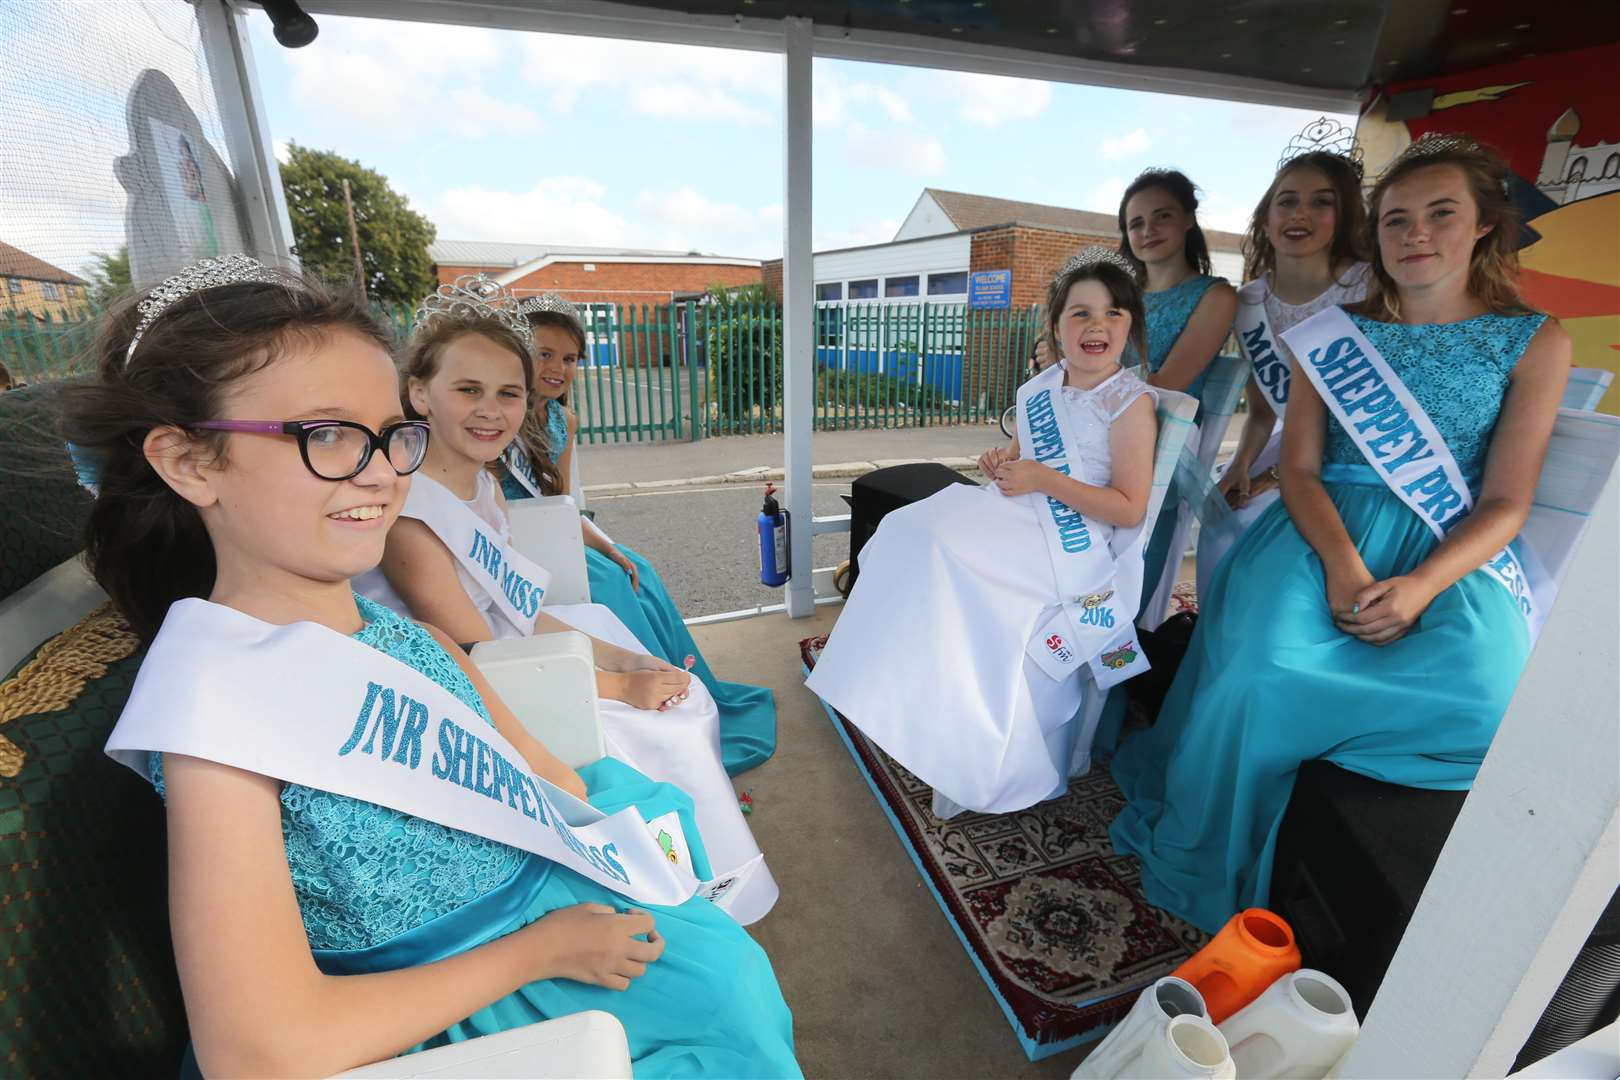 Sheppey Princess float at the Sheppey Carnival